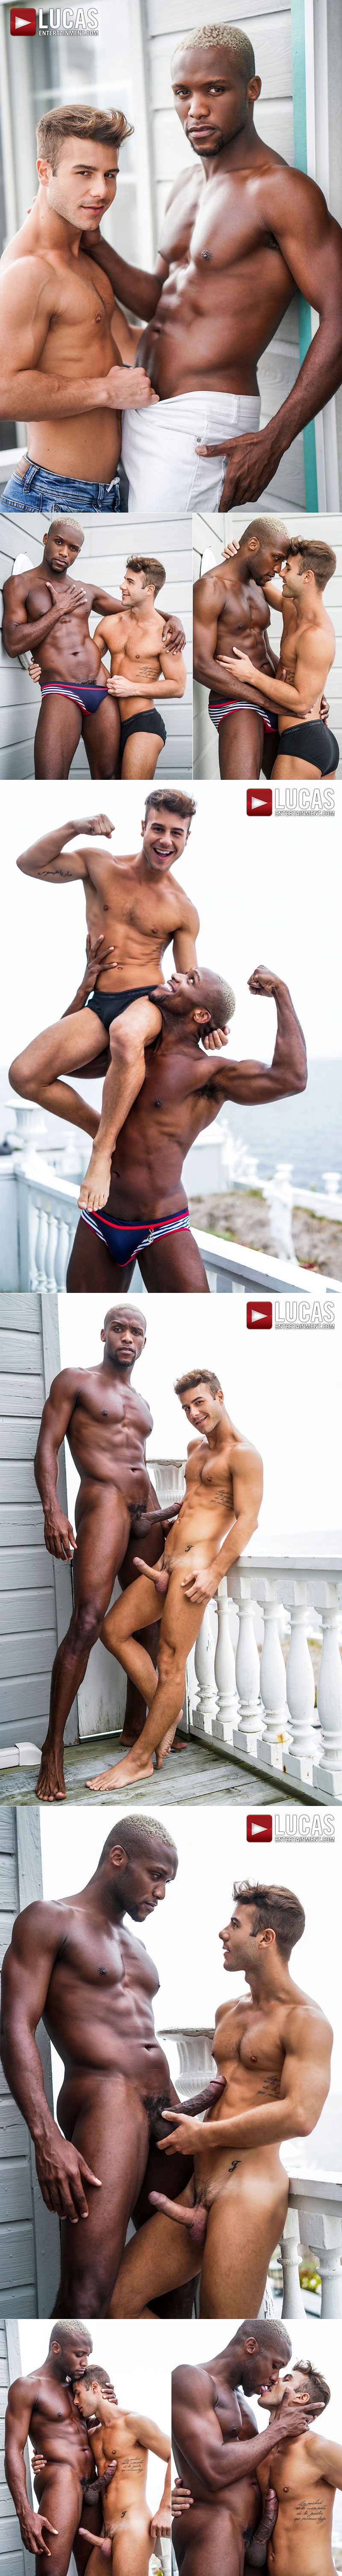 Lucas Entertainment: Allen King rides Andre Donovan's huge, raw cock in "Fire Island Sex Party"